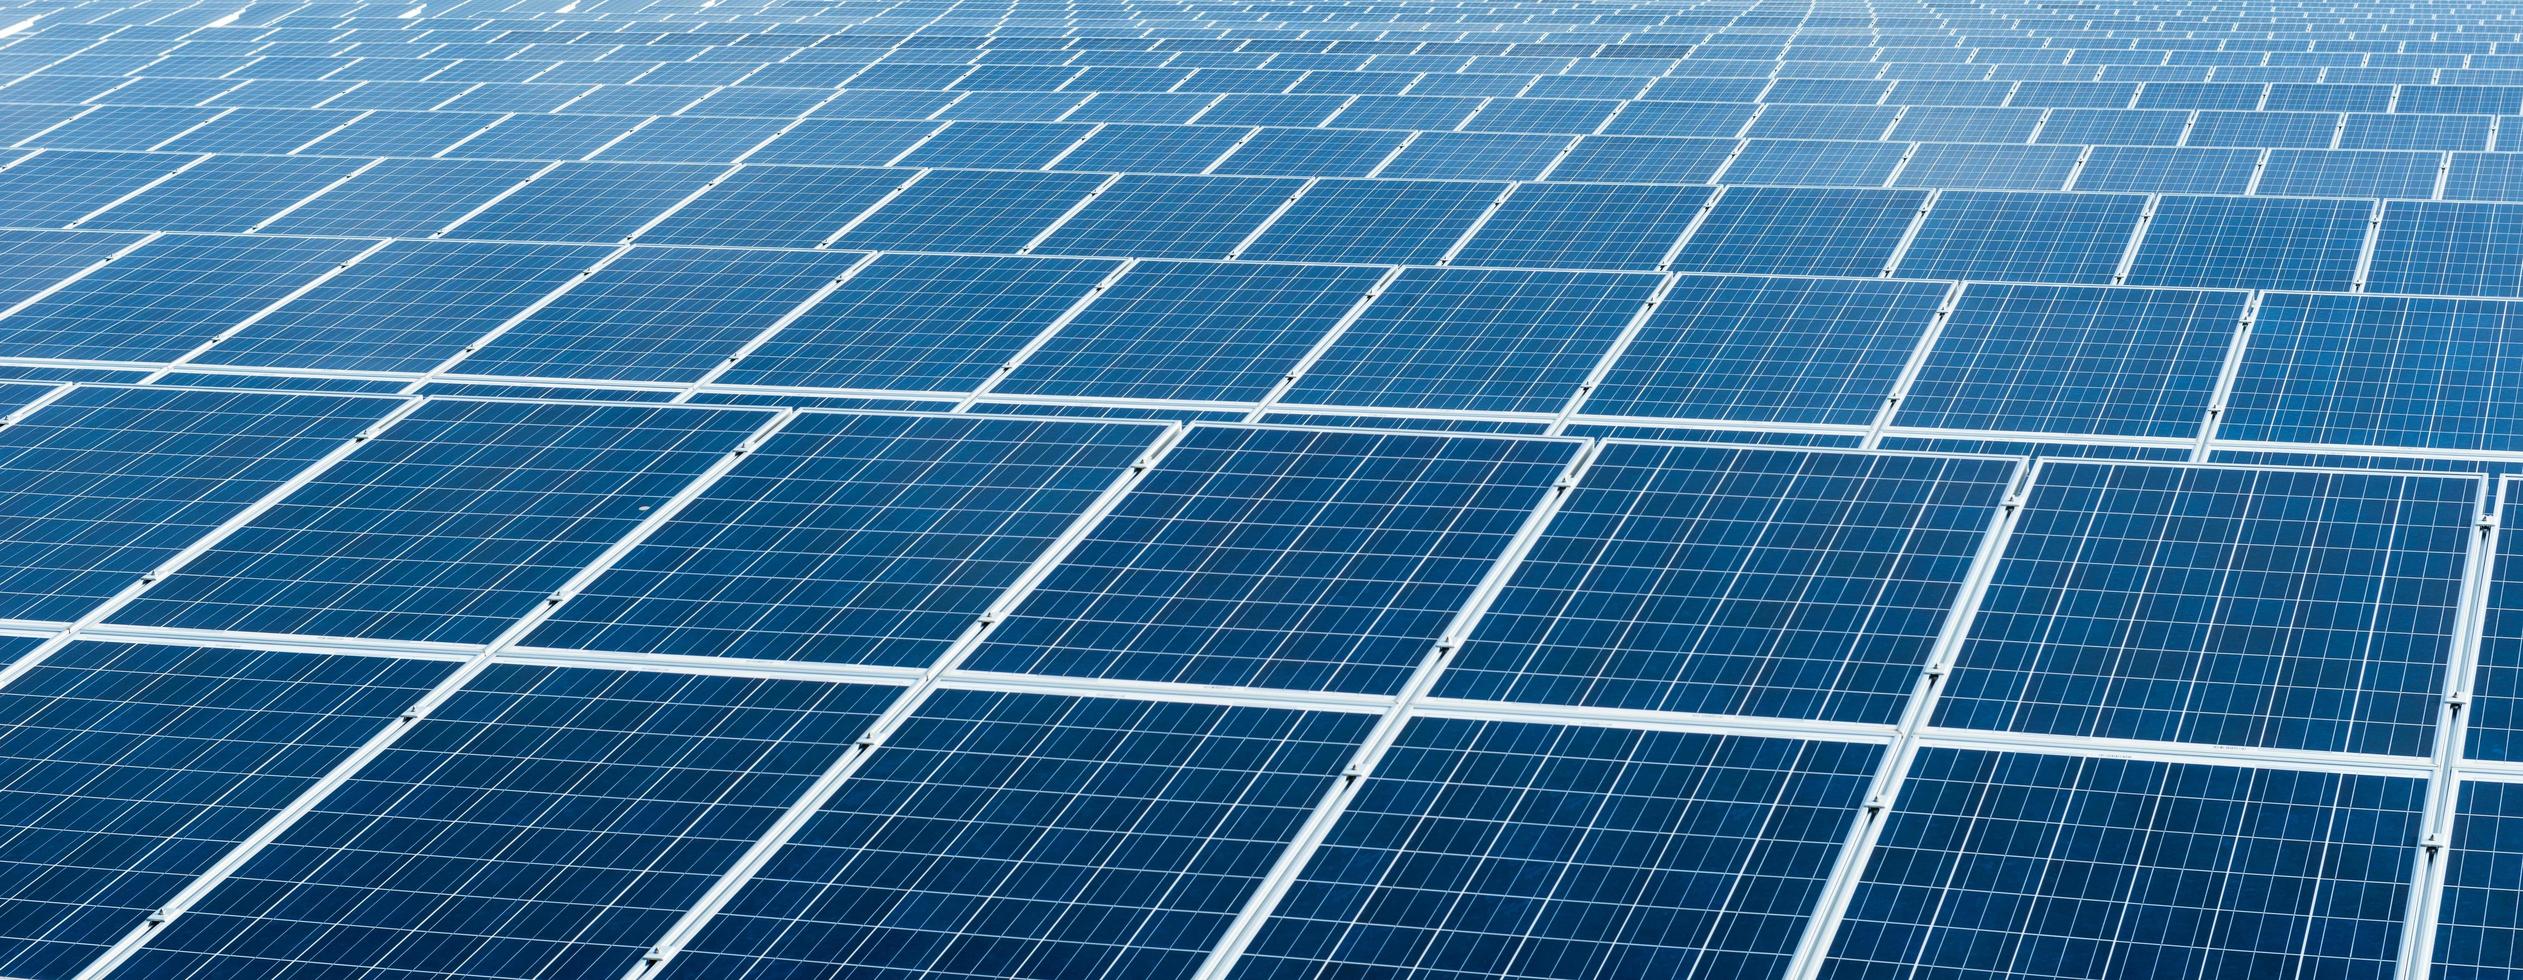 Solar cell panels in a photovoltaic power plant photo